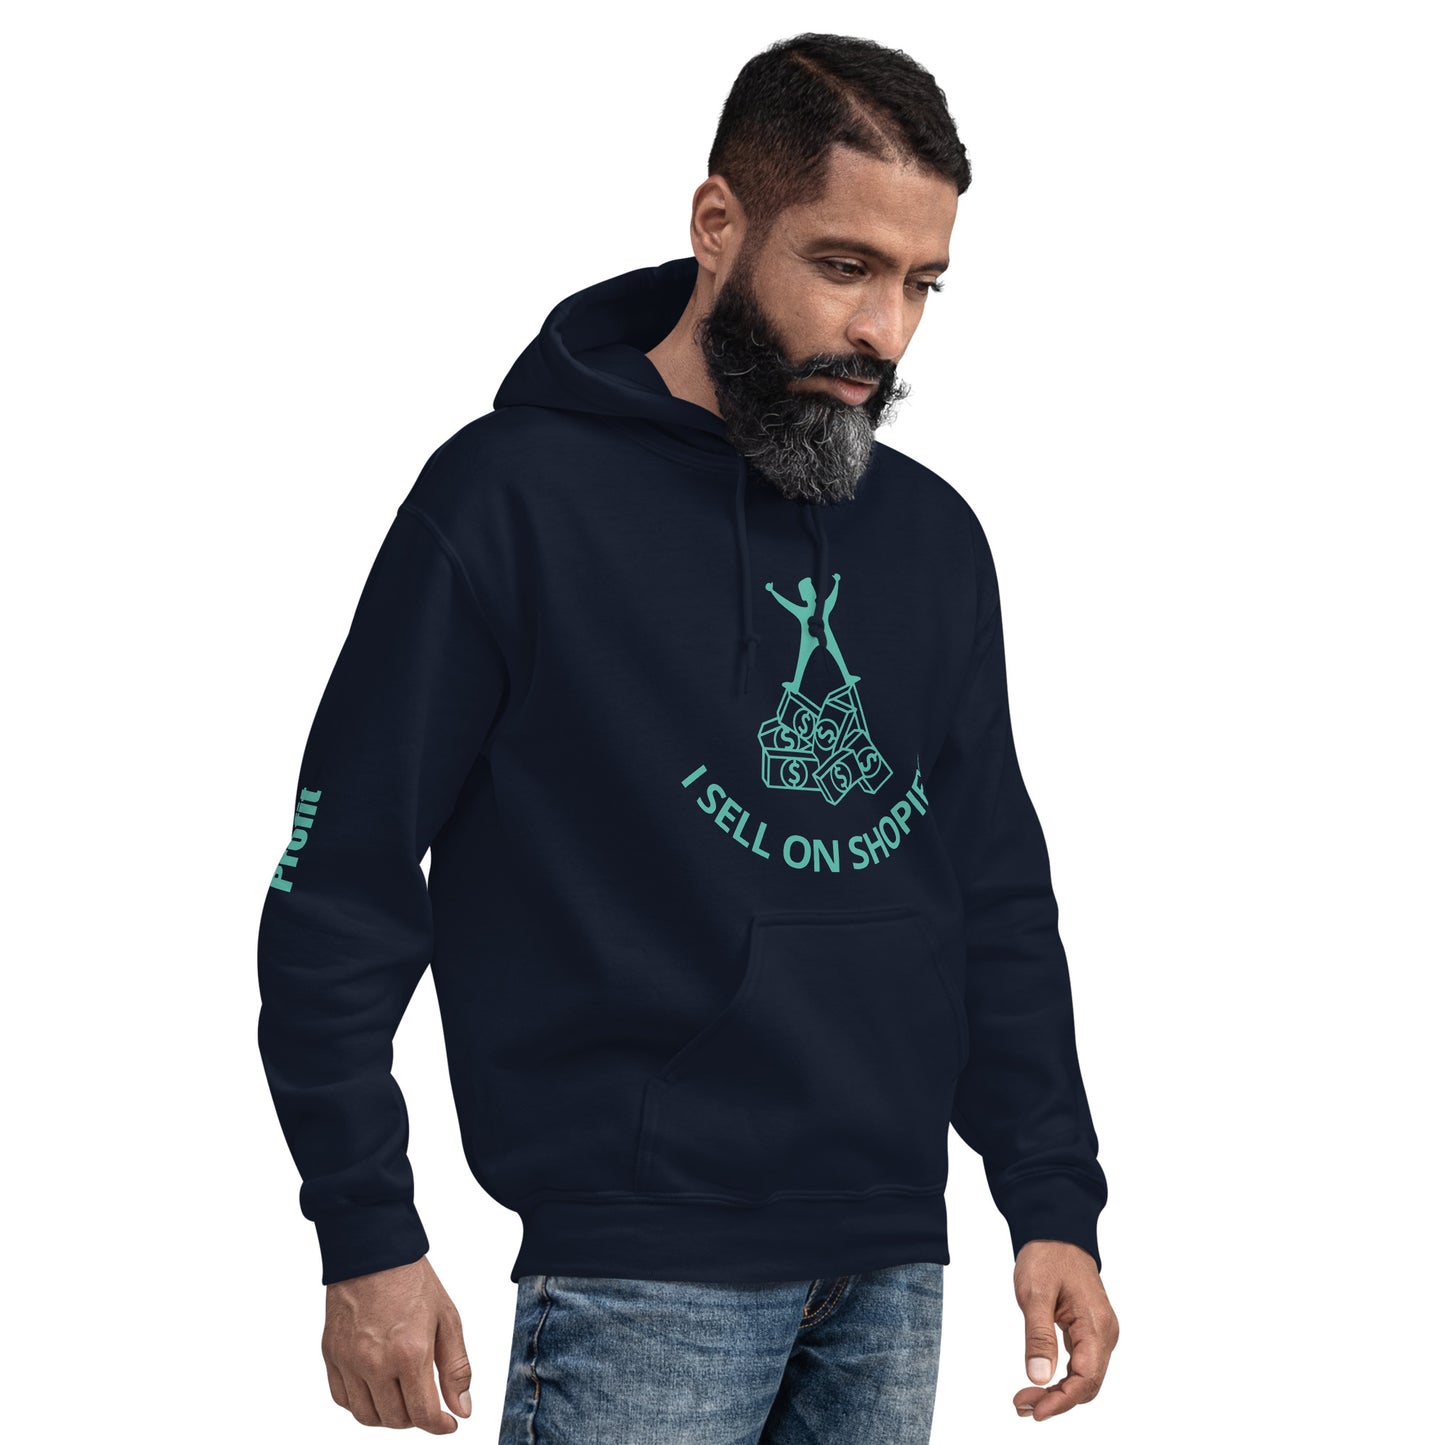 Shopify store owner hoodie